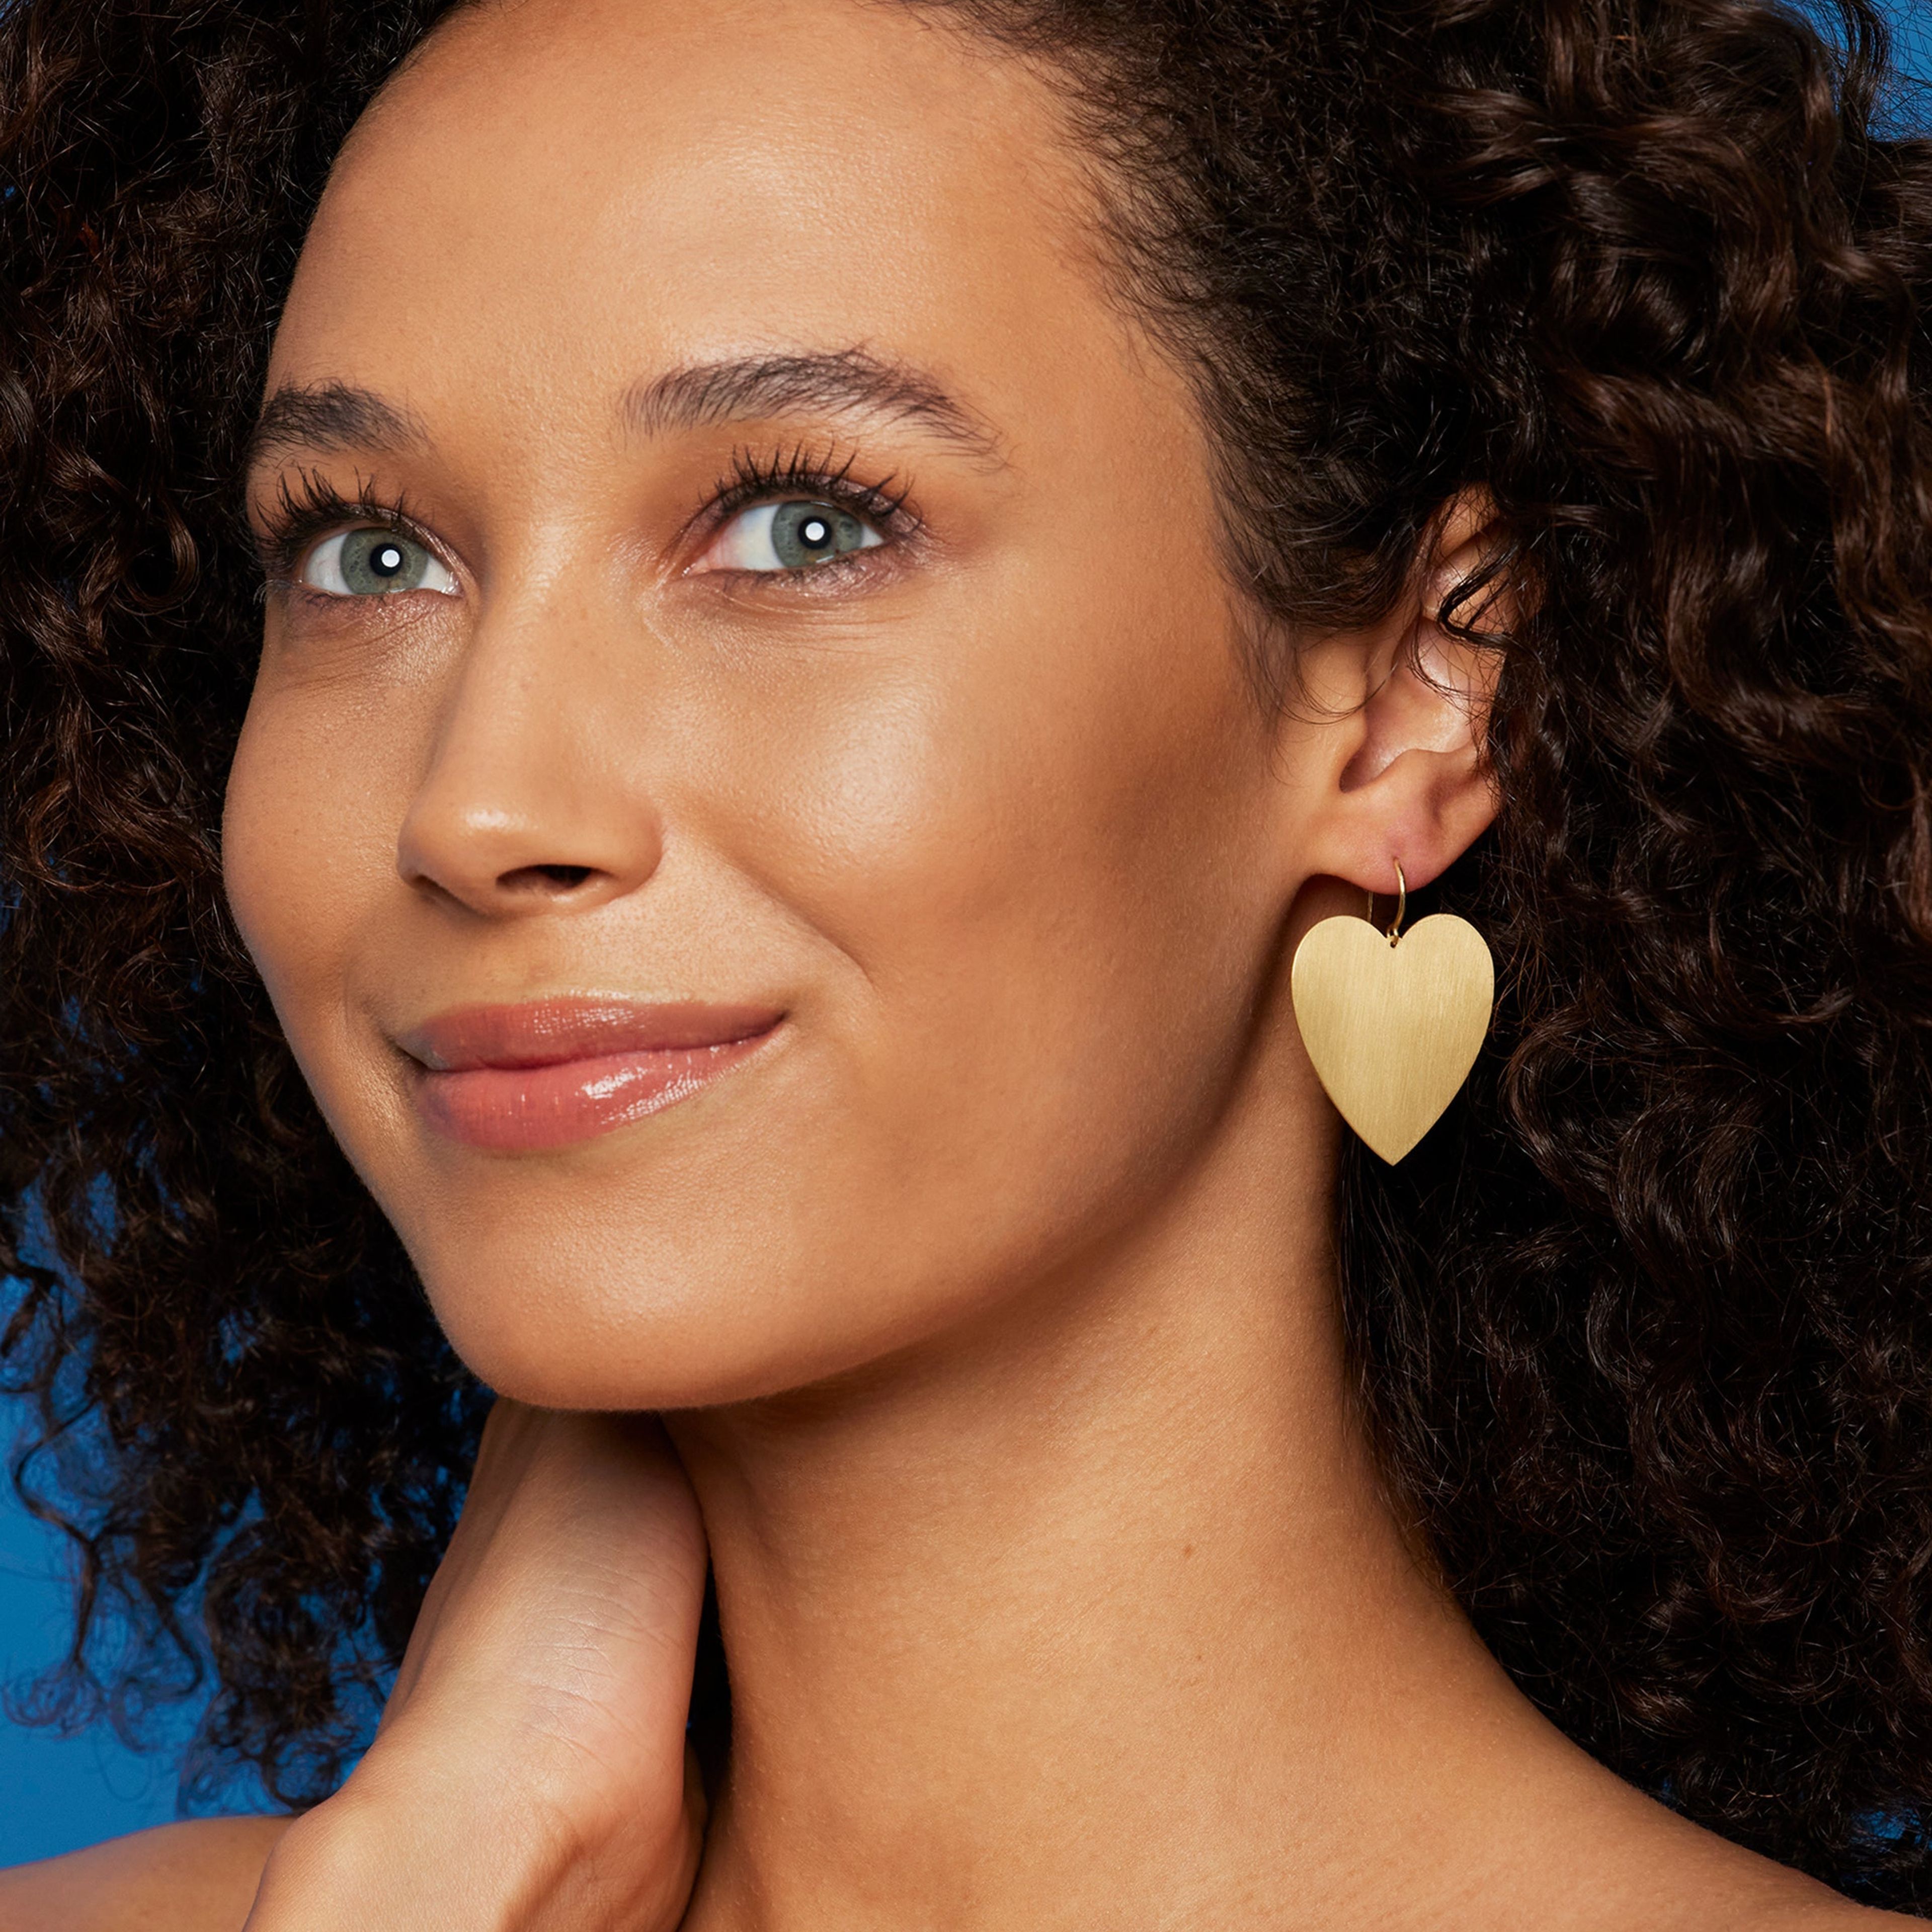 Large Gold Classic Love Earrings